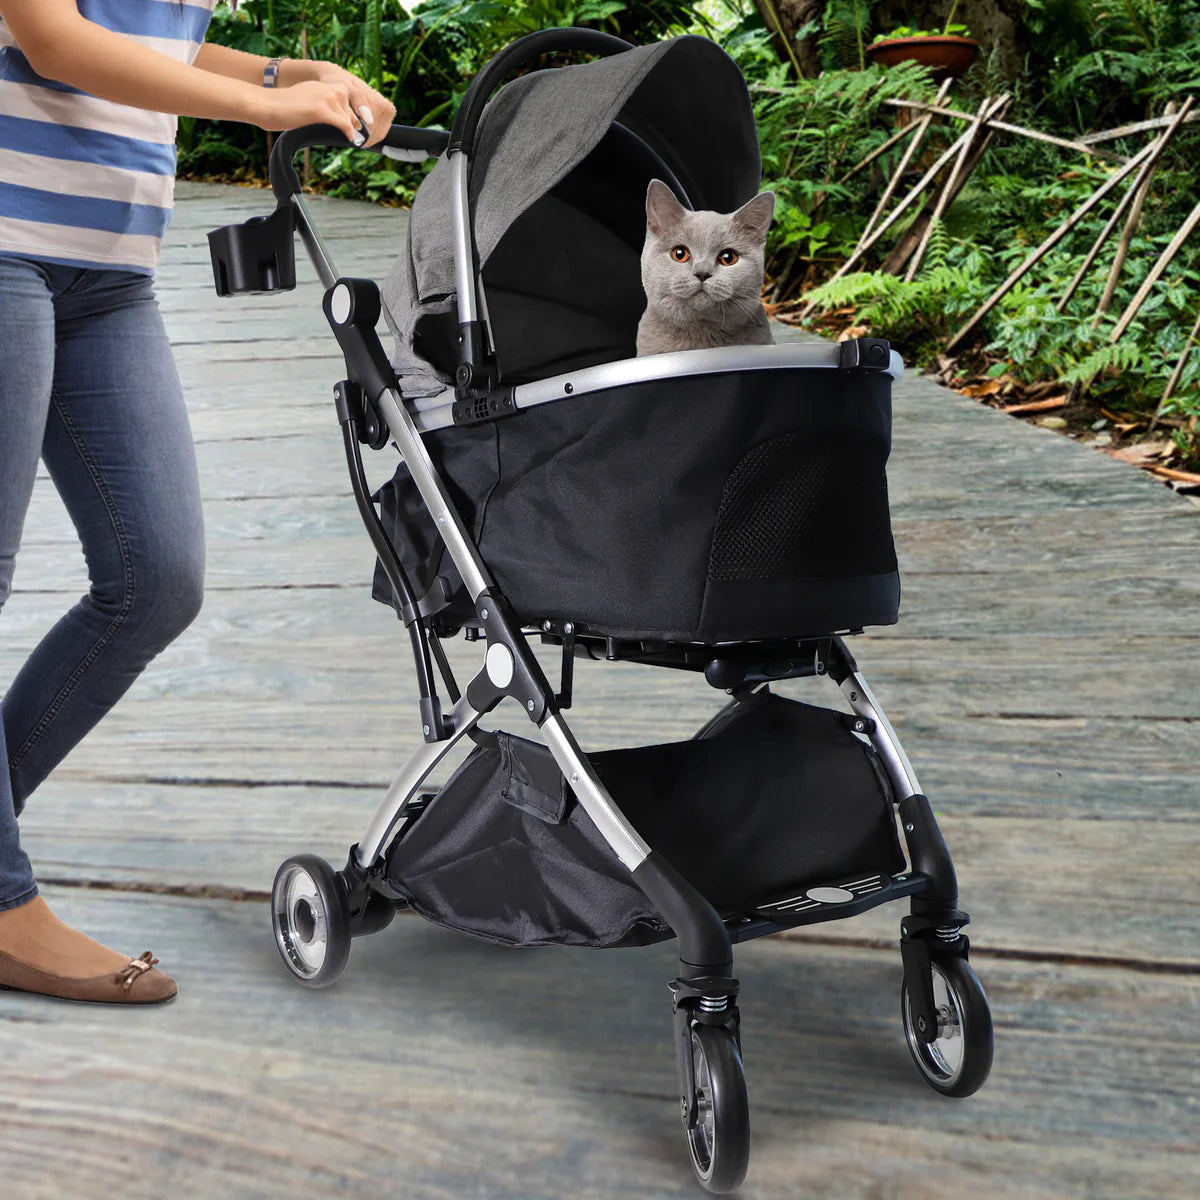 Pet Stroller for Small Dogs Cats, Stroller with Detachable Carrier, Telescopic Handle, One-Hand Quick Fold